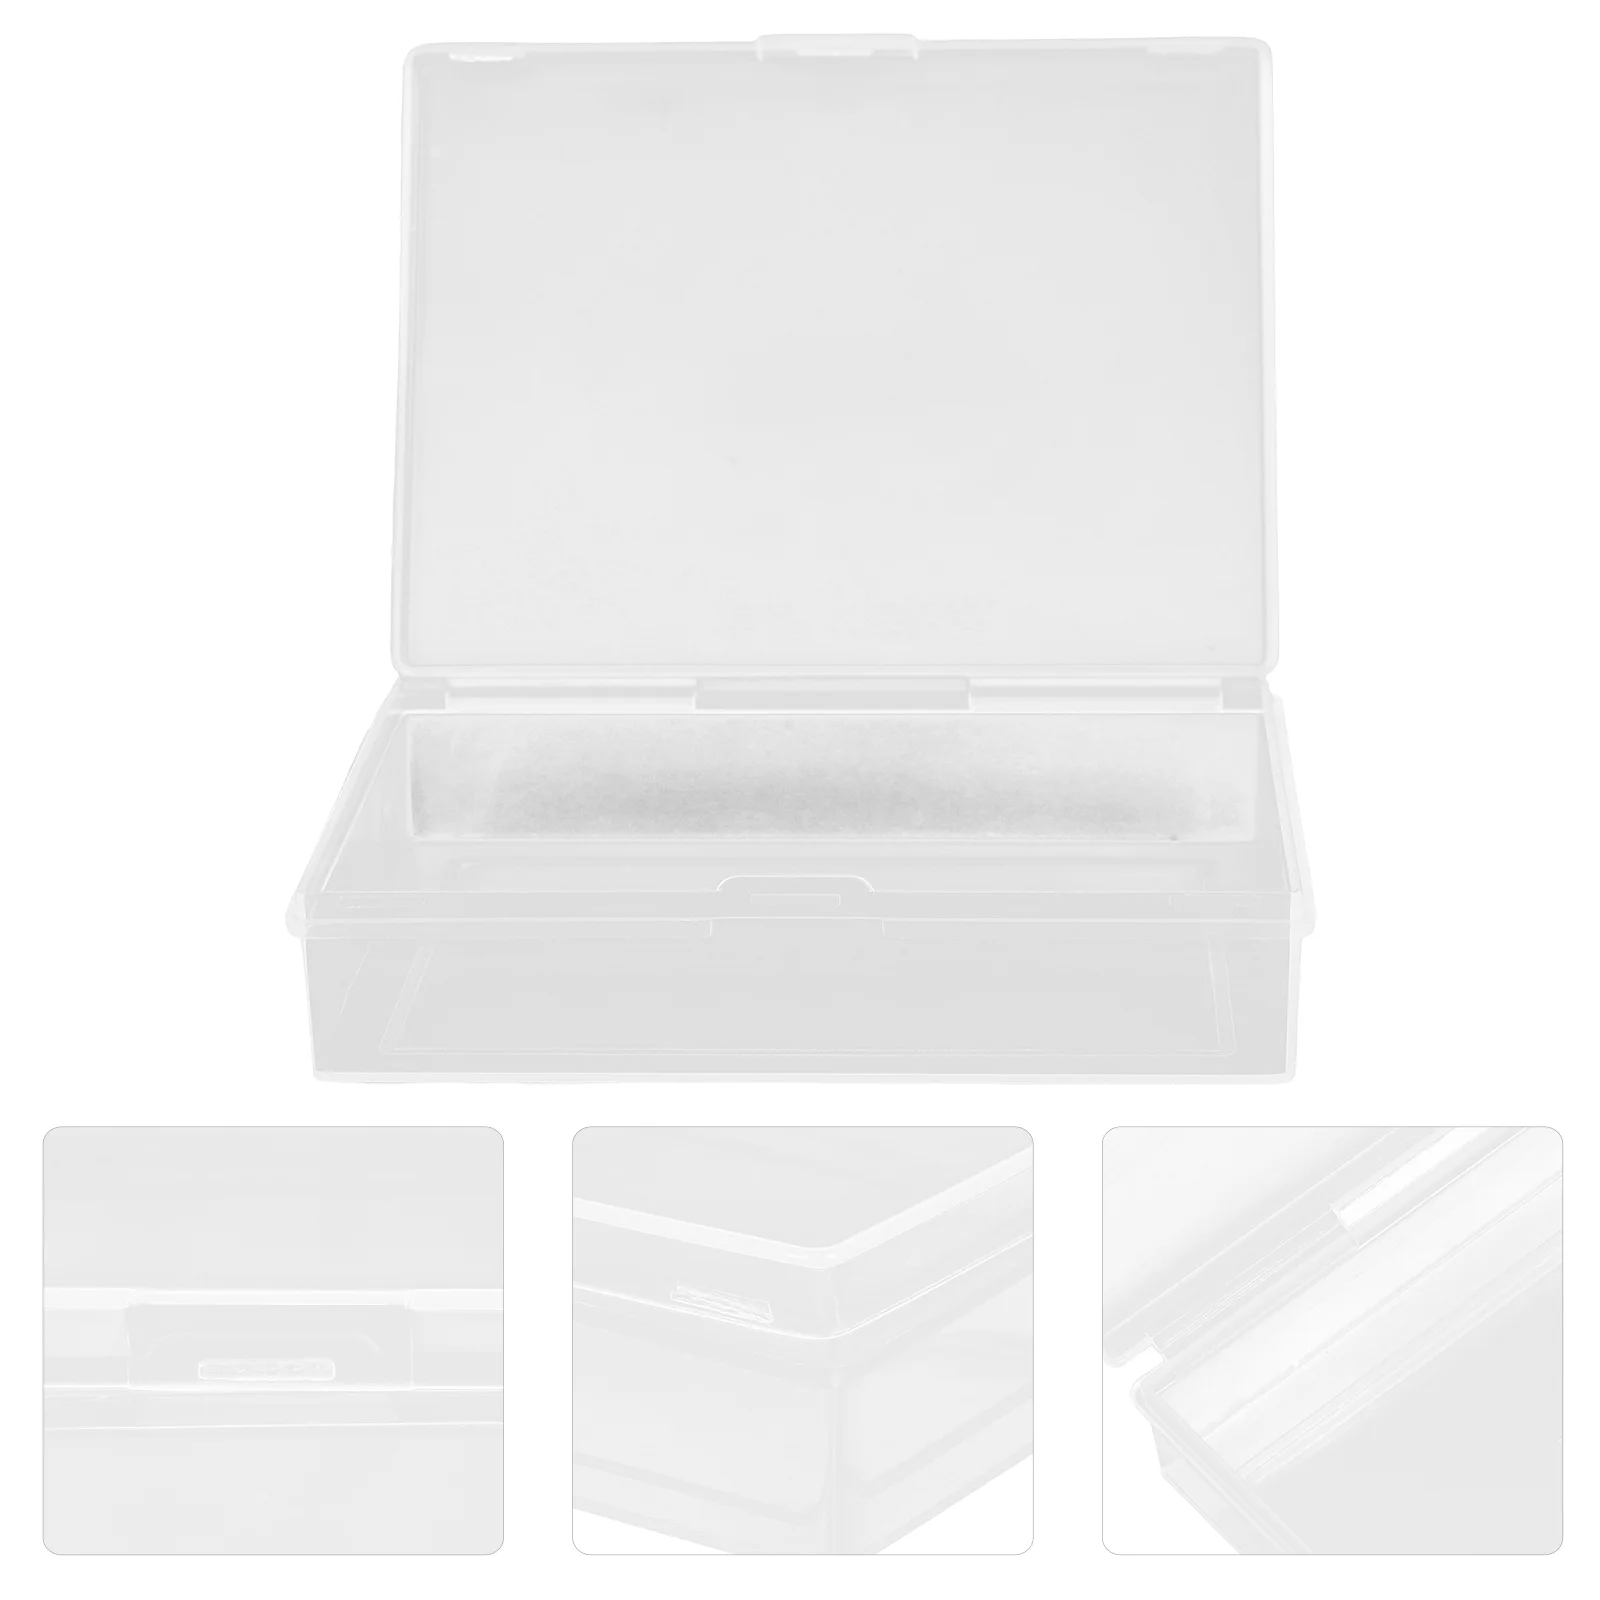 

2 Pcs Transparent Storage Box for Playing Cards Deck Holder Blank Carrying Case Paper